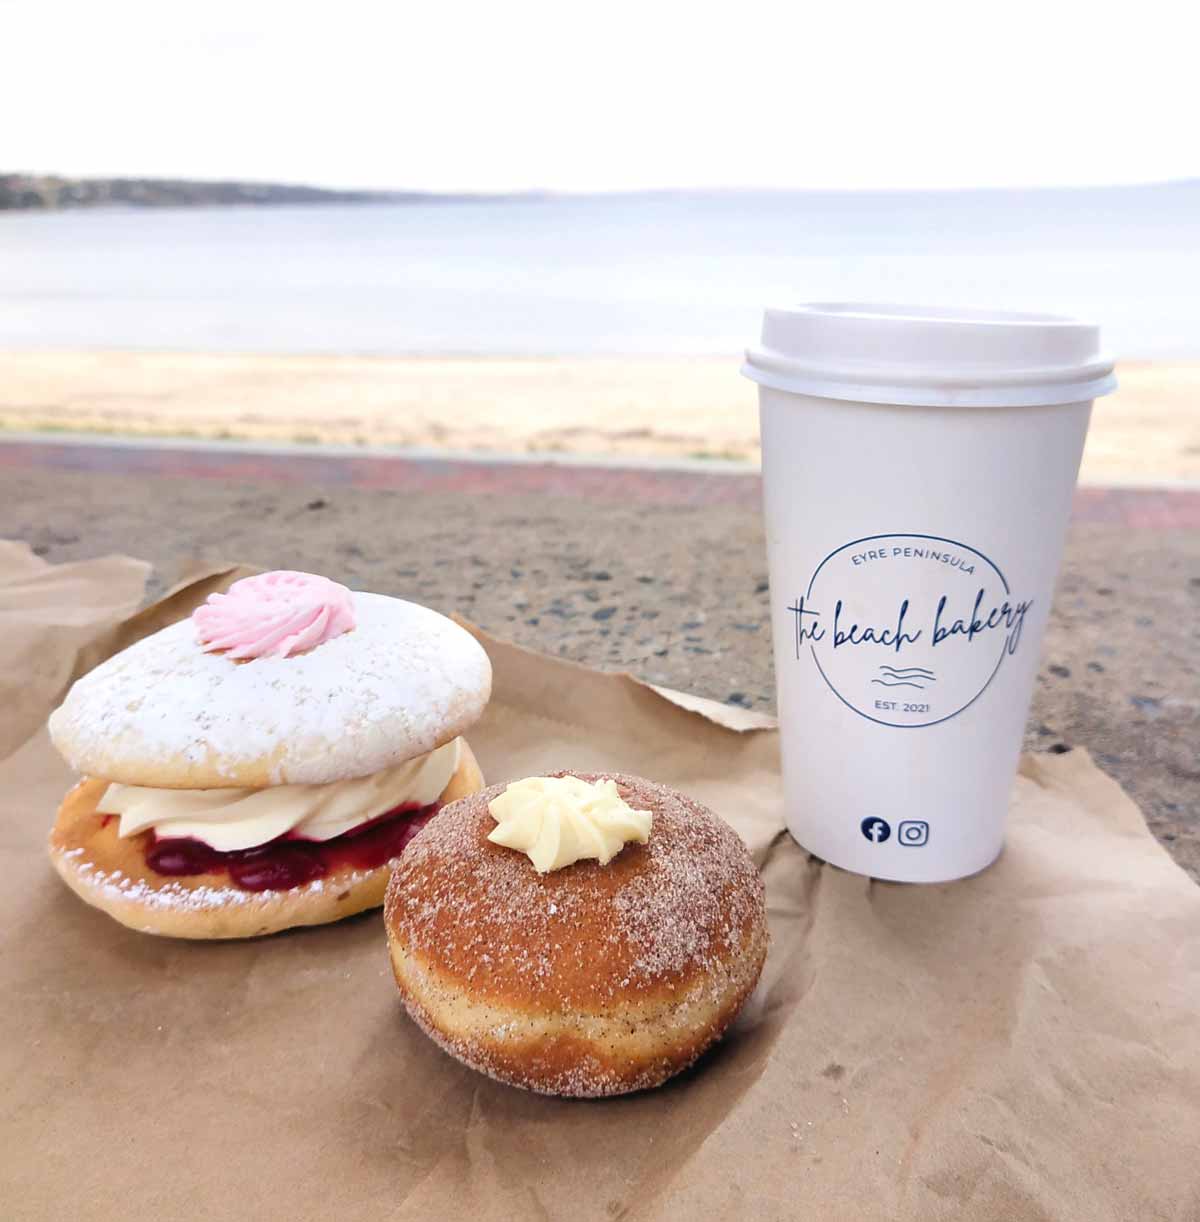 Coffee & sweet treats from The Beach Bakery on King in Port Lincoln, Eyre Peninsula, South Australia.